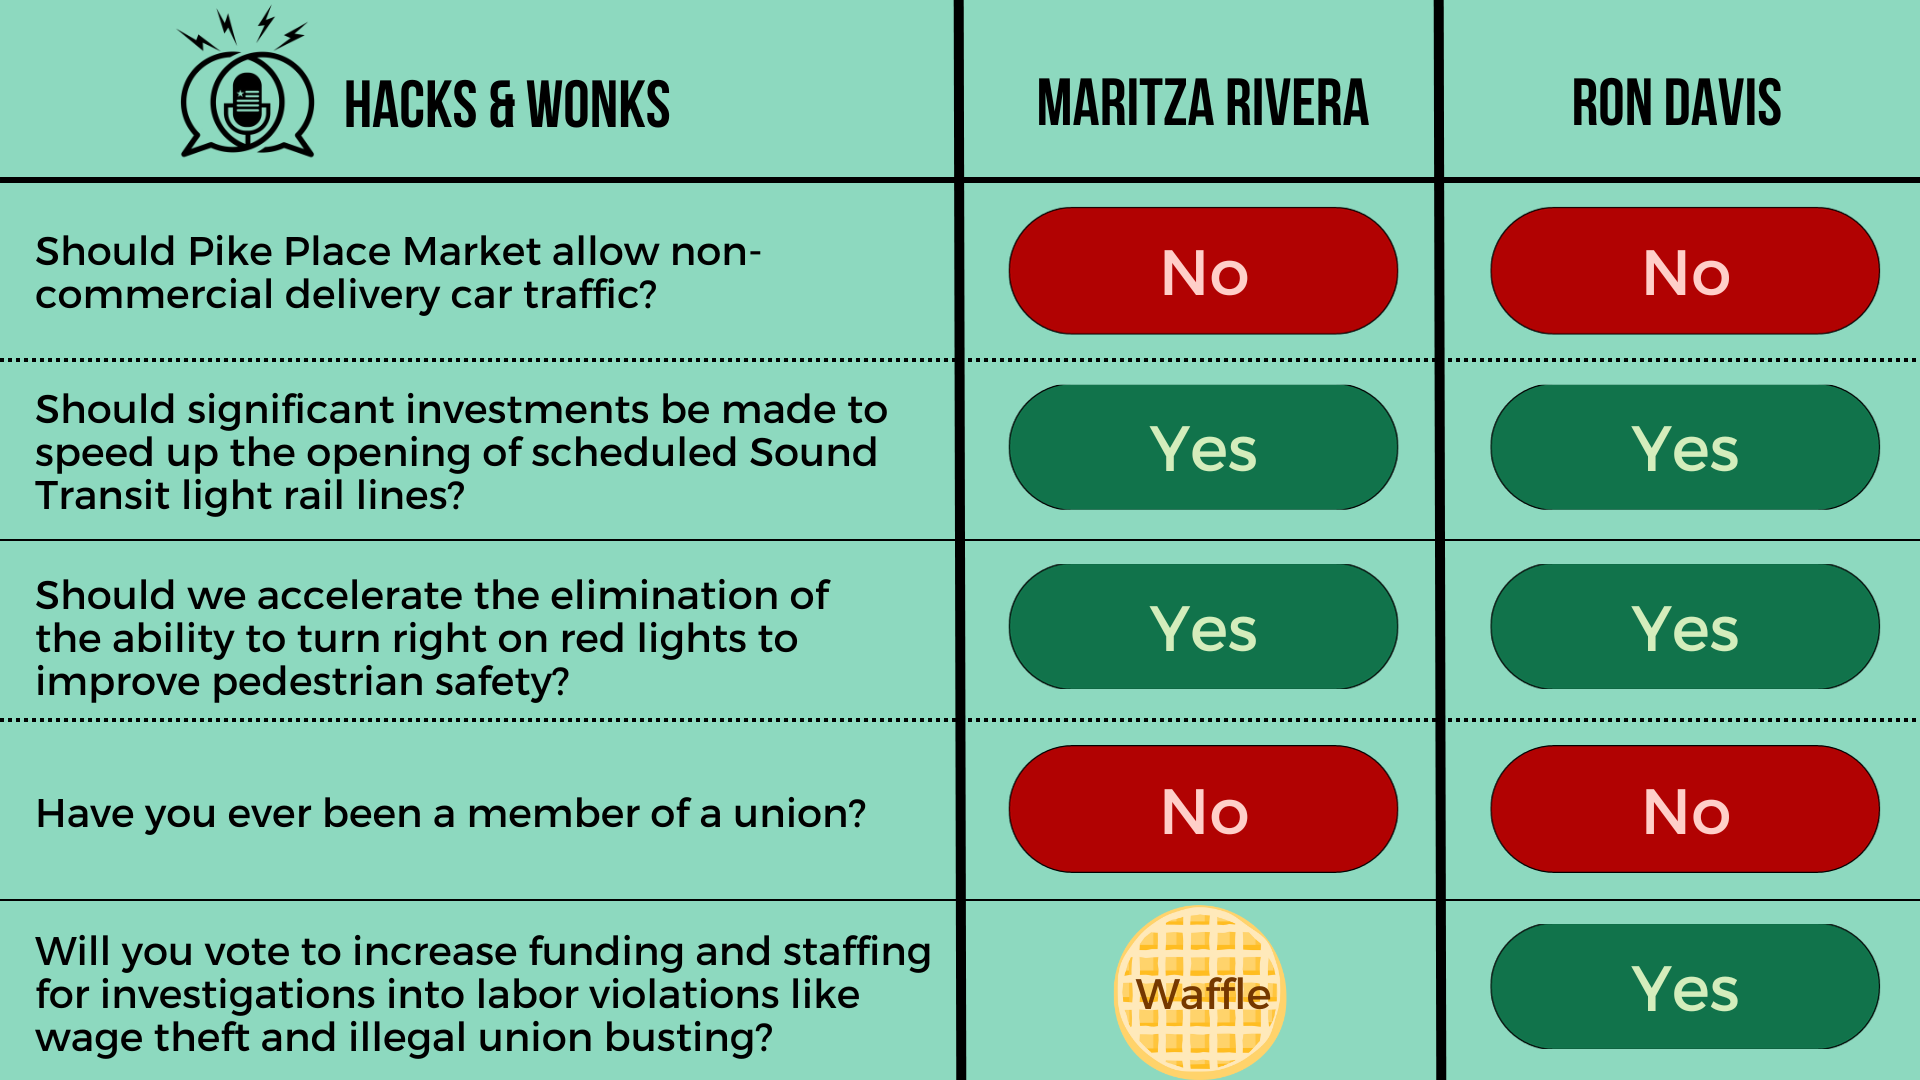 Q: Should Pike Place Market allow non-commercial delivery car traffic? Maritza Rivera: No, Ron Davis: No  Q: Should significant investments be made to speed up the opening of scheduled Sound Transit light rail lines? Maritza Rivera: Yes, Ron Davis: Y